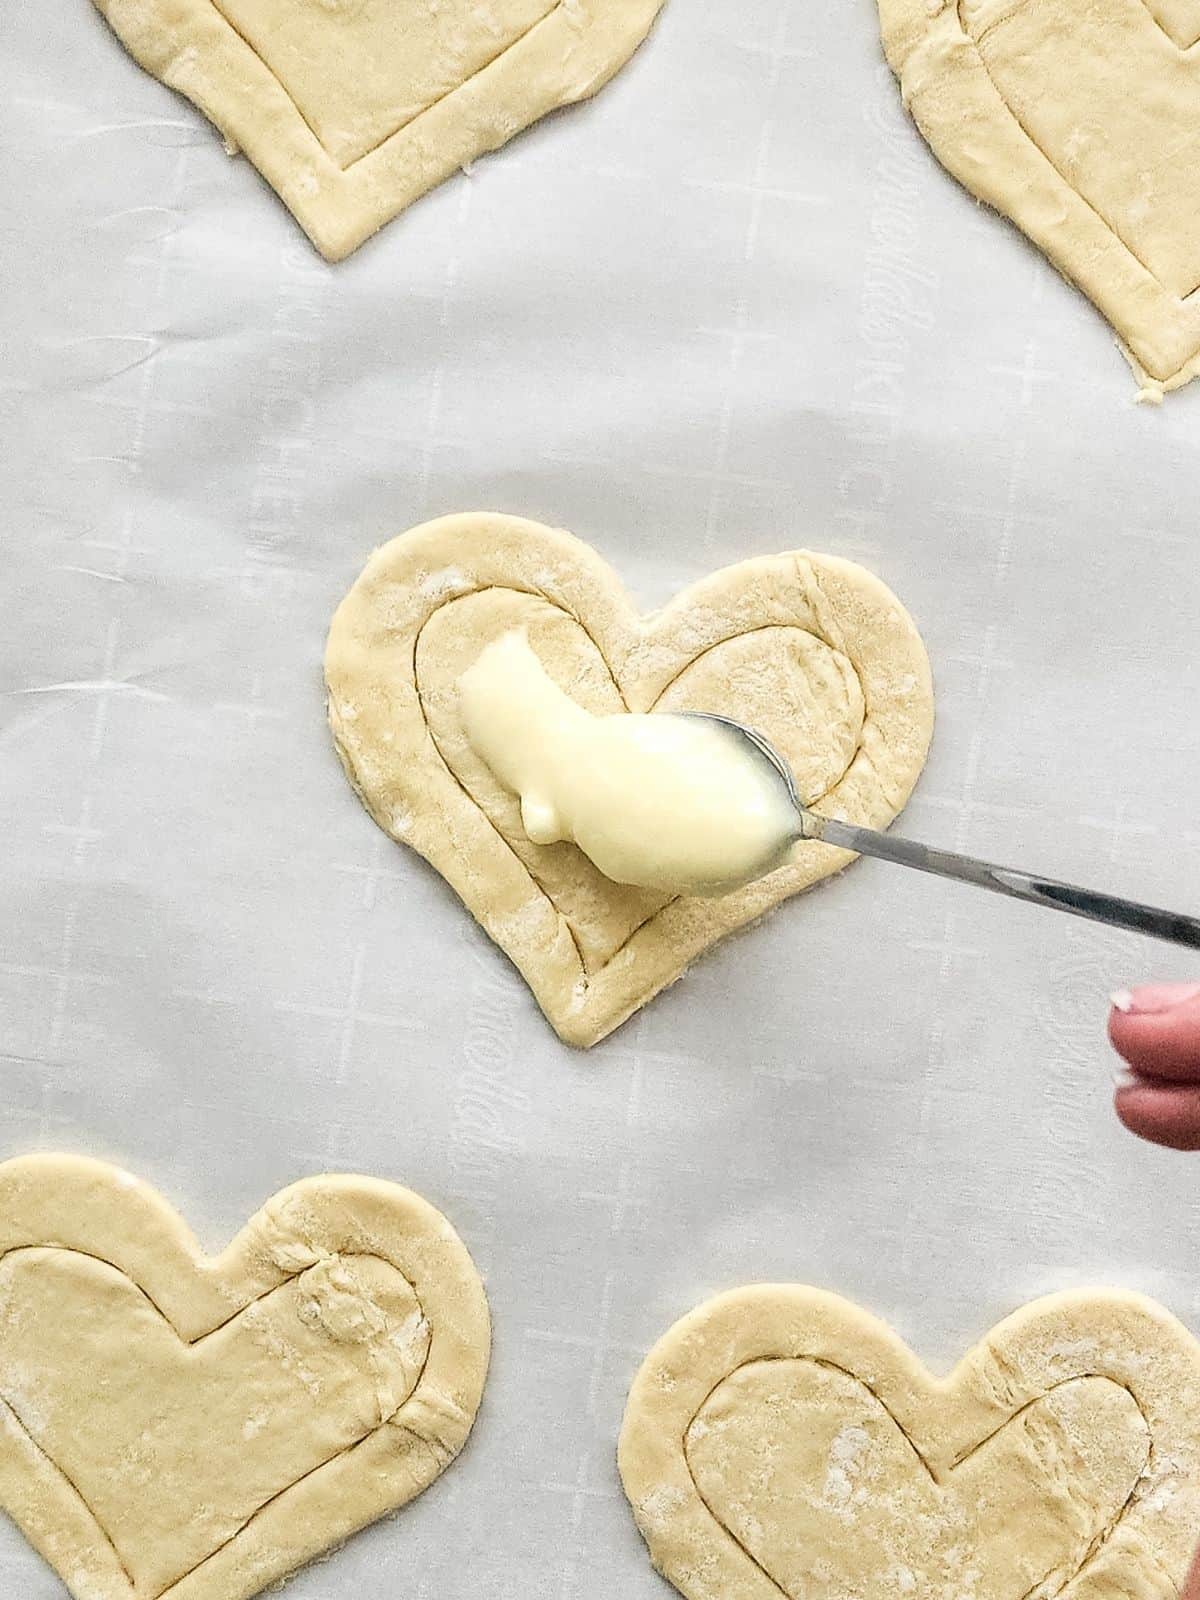 Add cream cheese filling to center of puff pastry heart shapes.